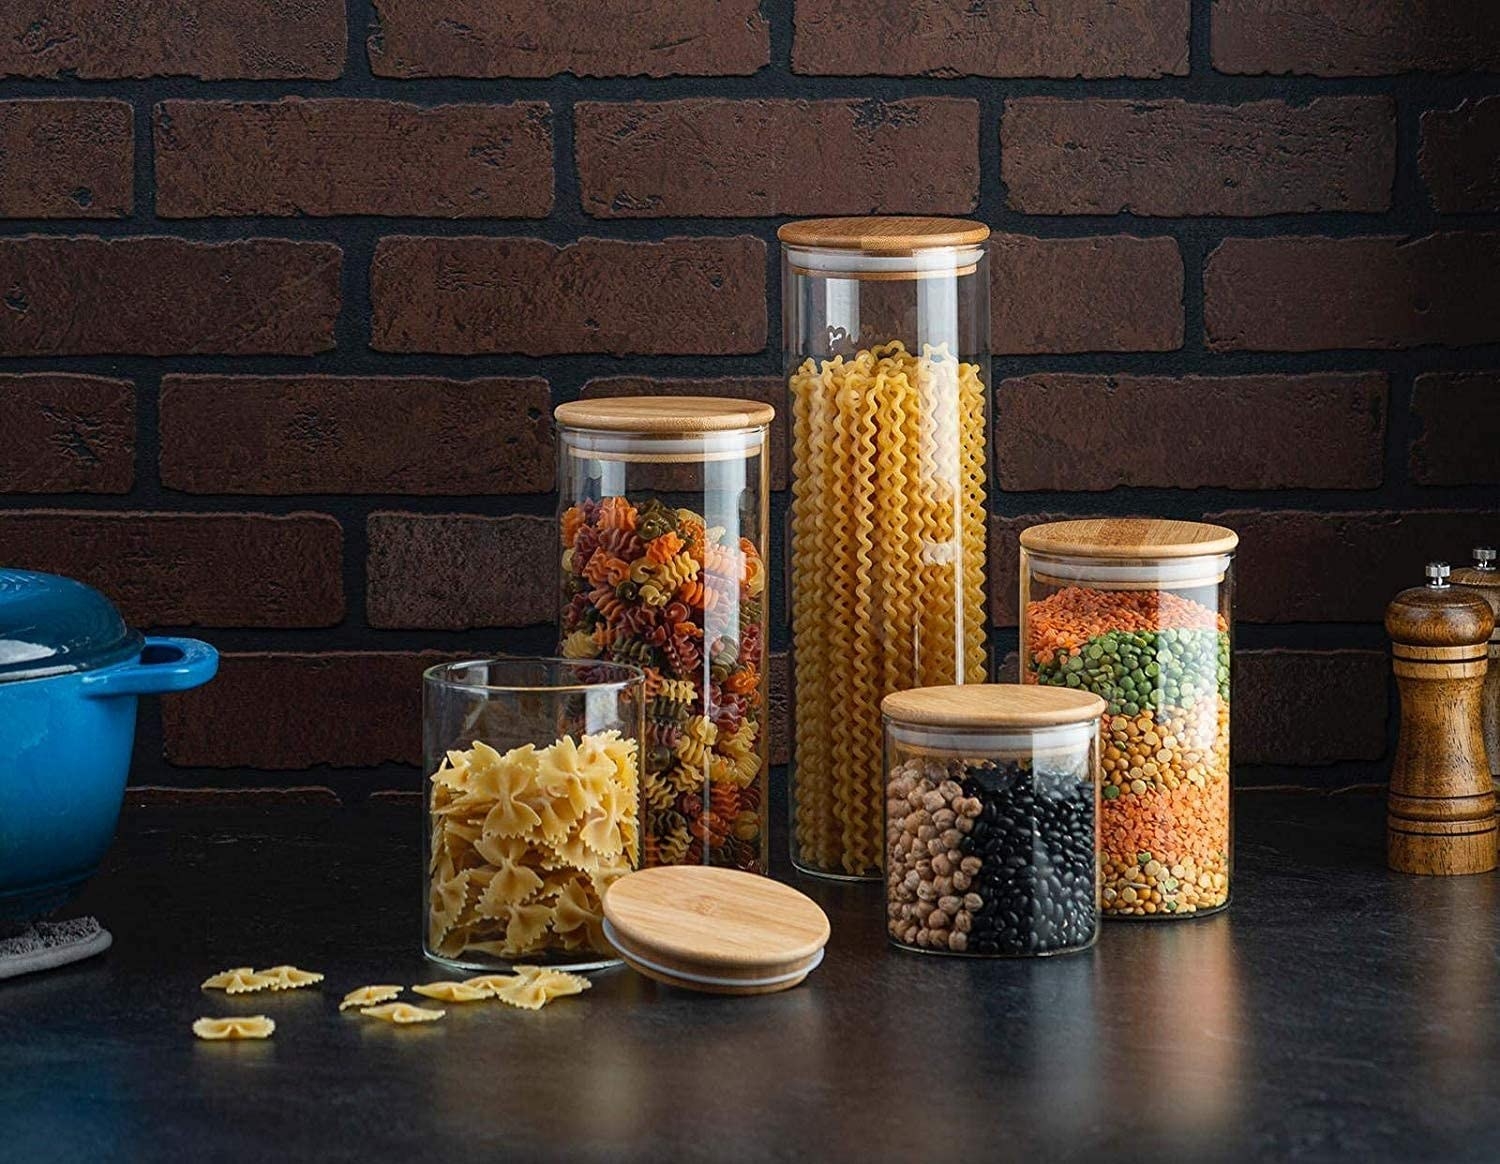 the canisters filled with dried goods like pasta and beans